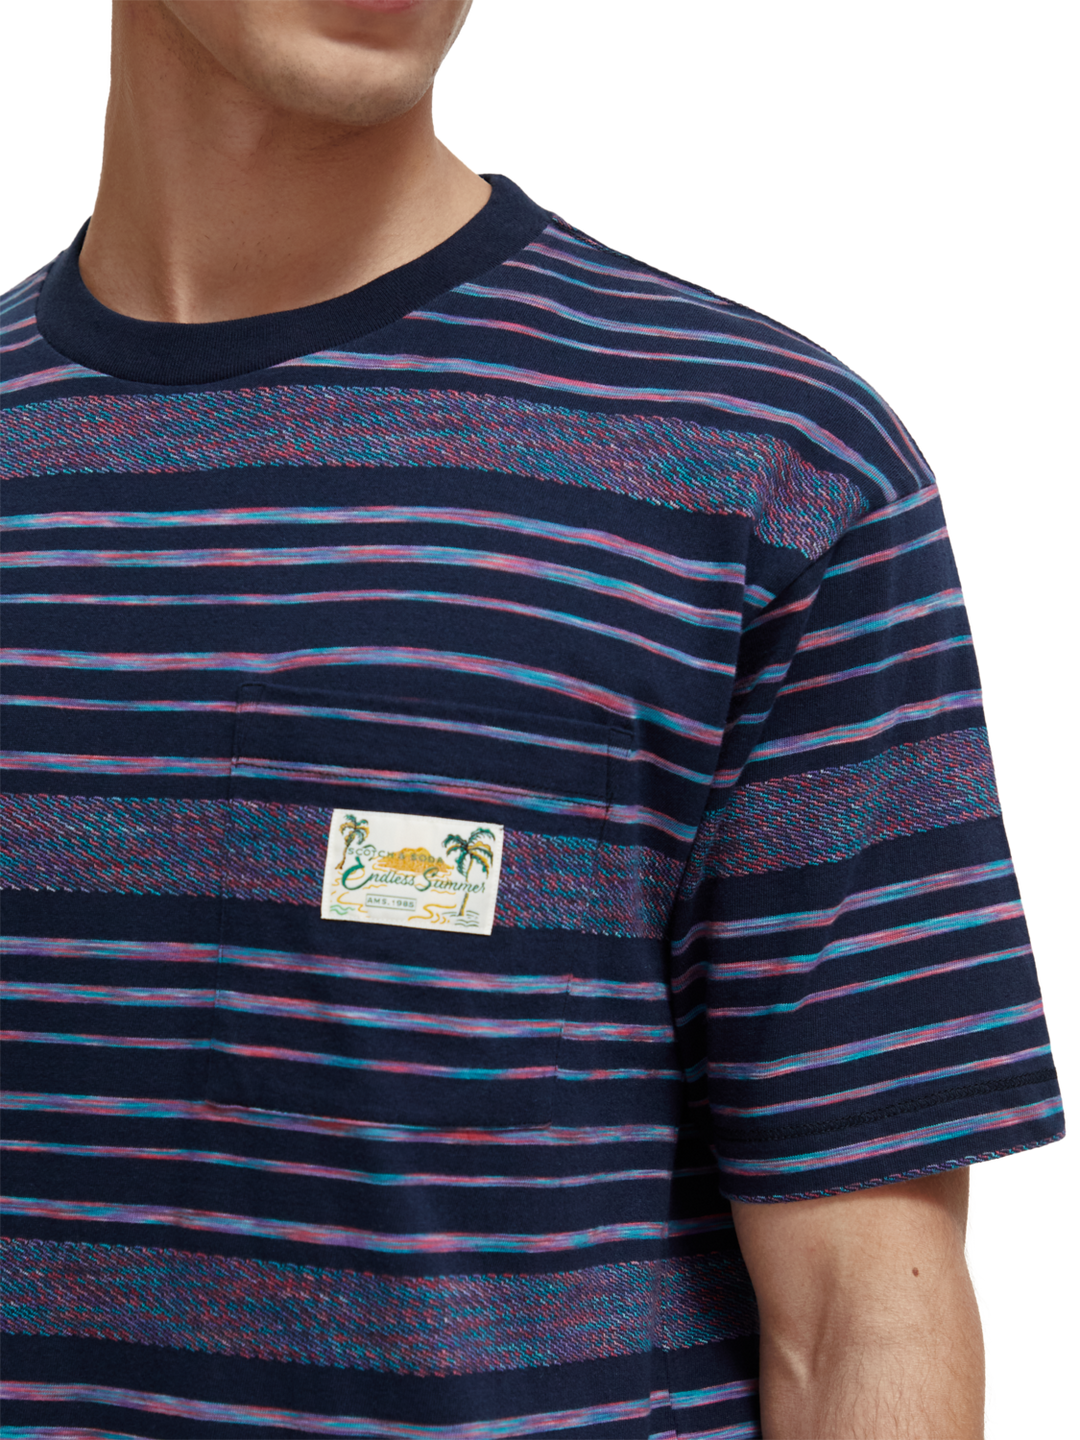 Jersey Structured Striped Tee in Multi Stripe | Buster McGee